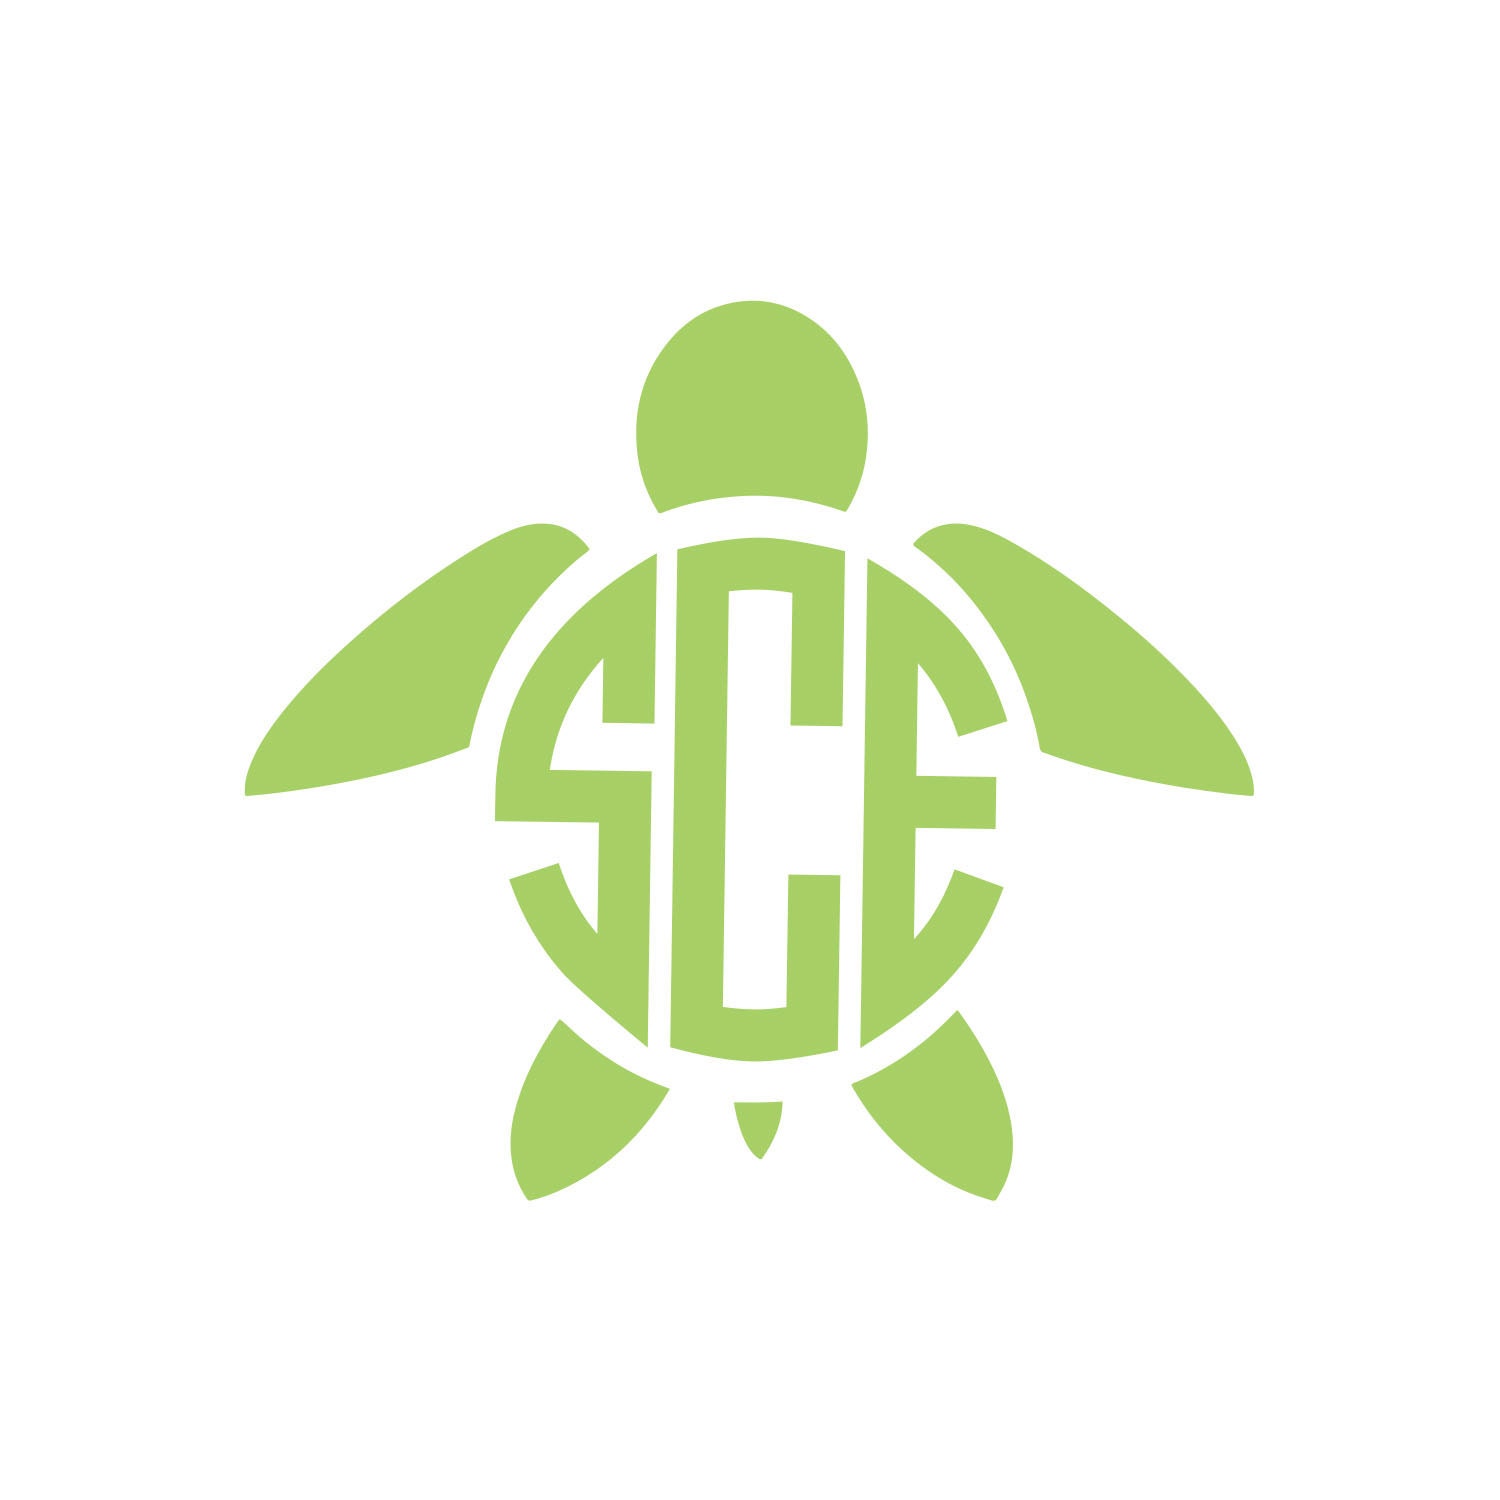 Download Turtle Monogram Vinyl Decal Icon 1 Color Choose from 14